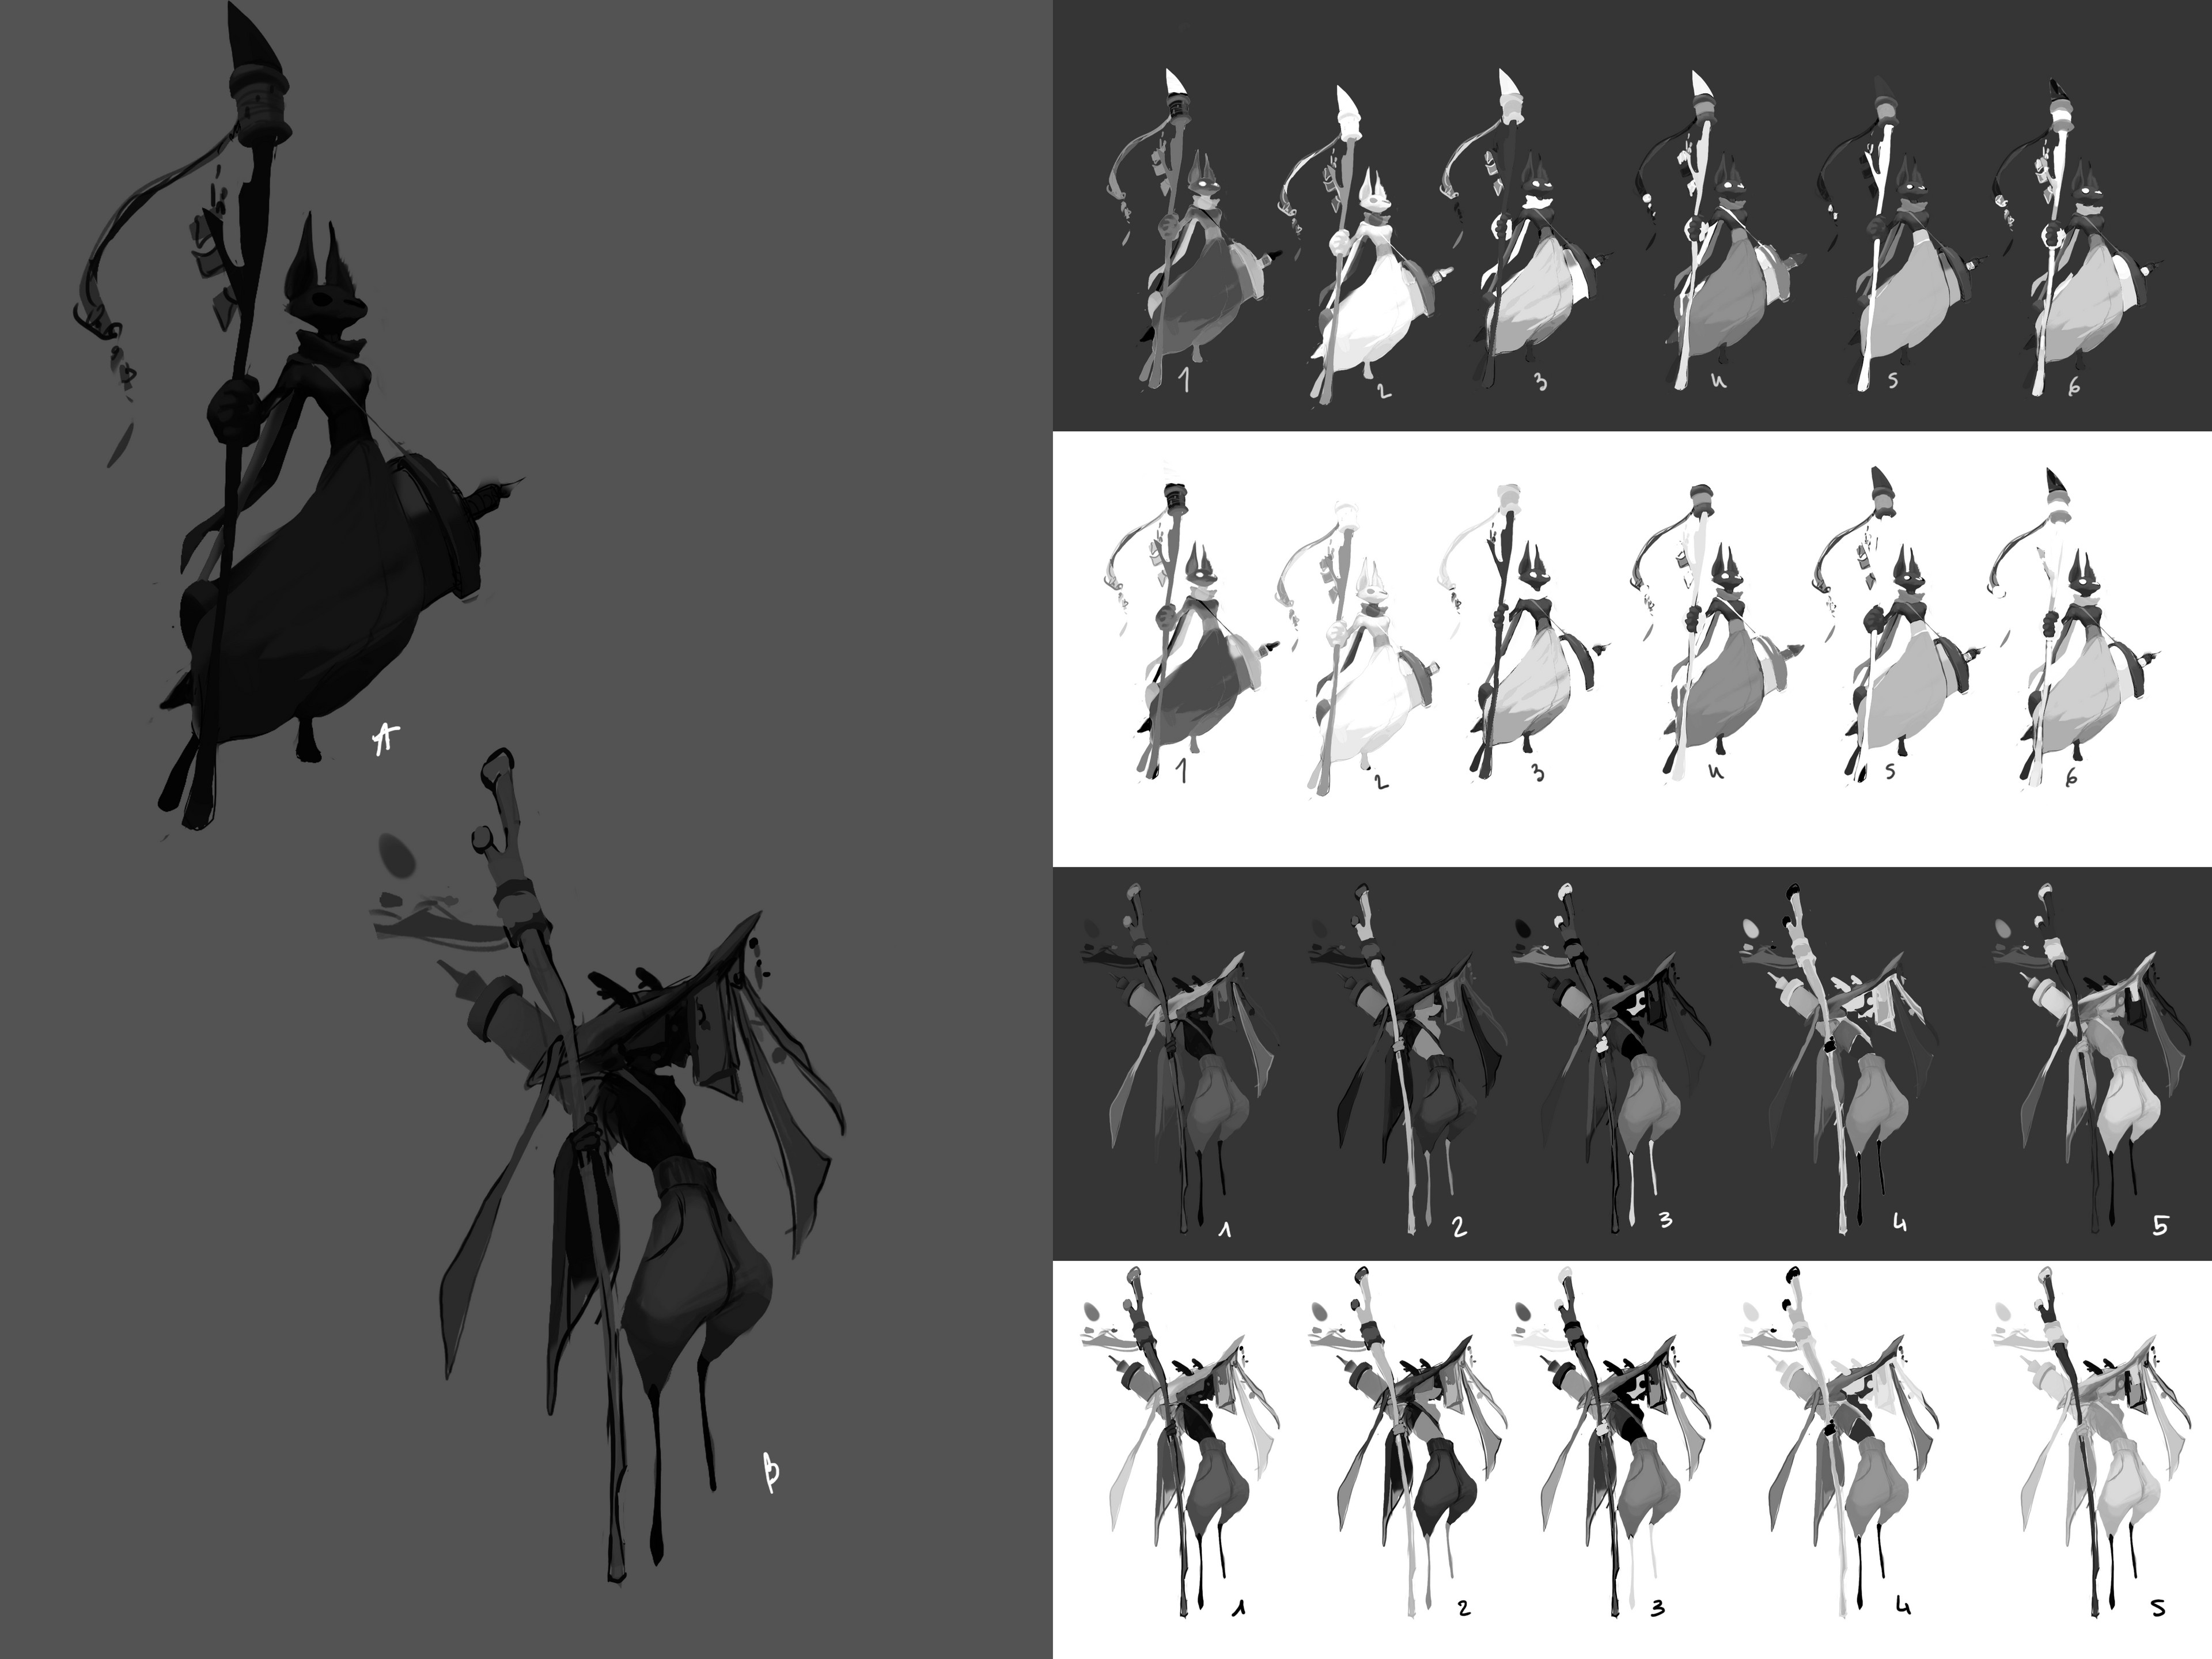 Playable character early sketches